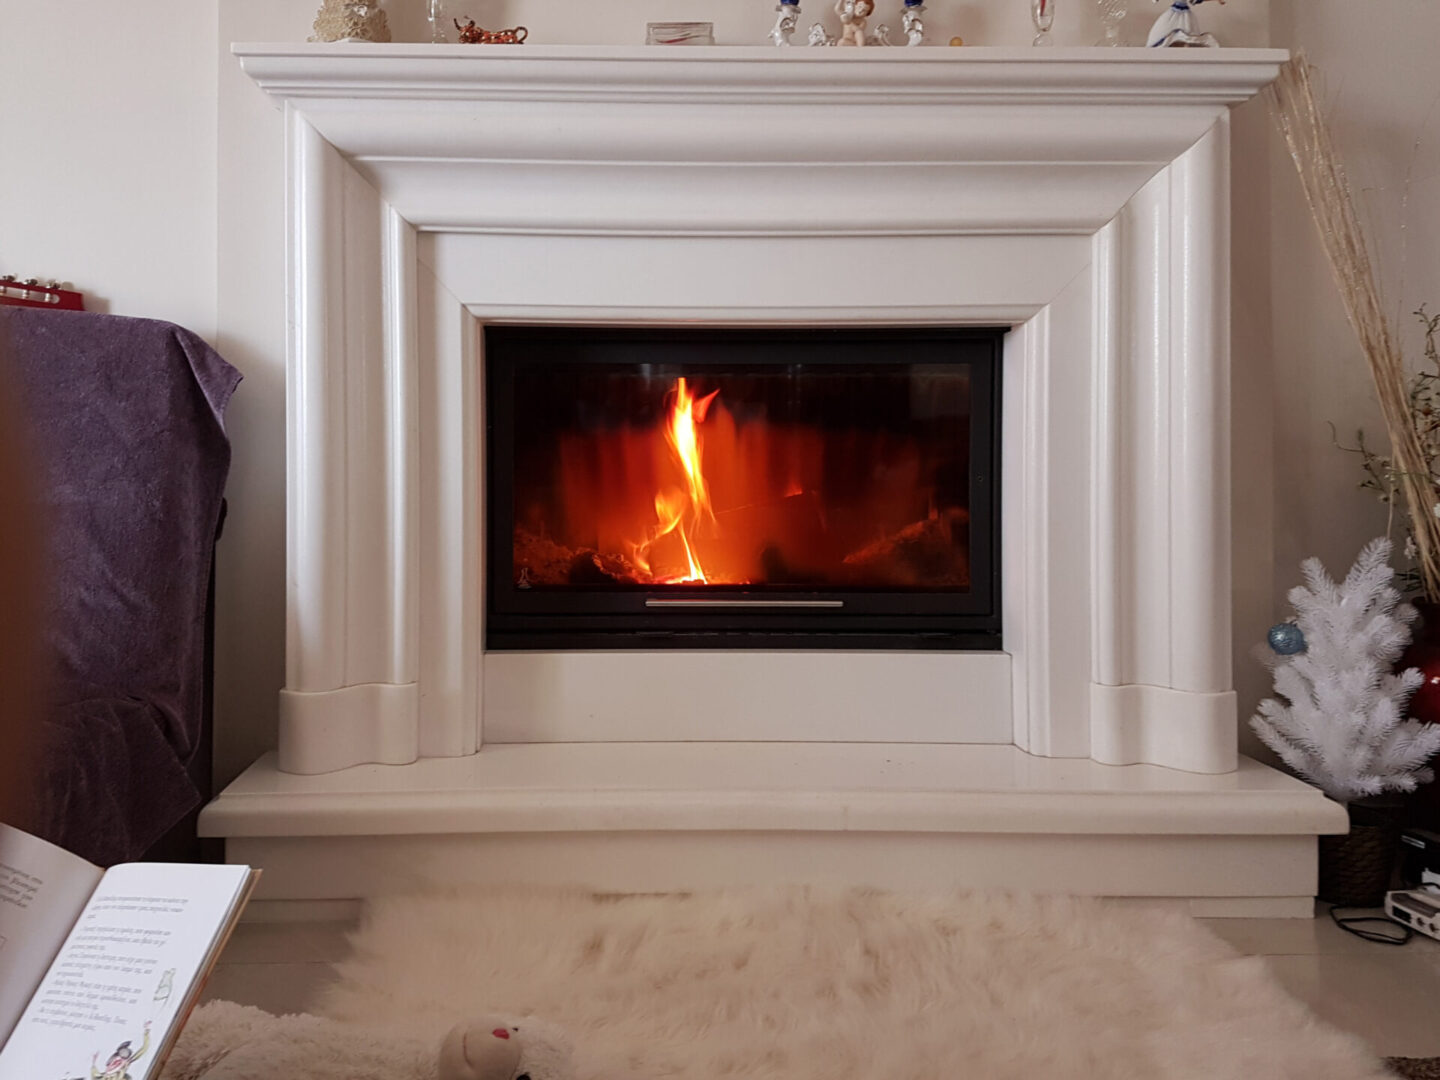 A fireplace with white stone surround and fire burning.